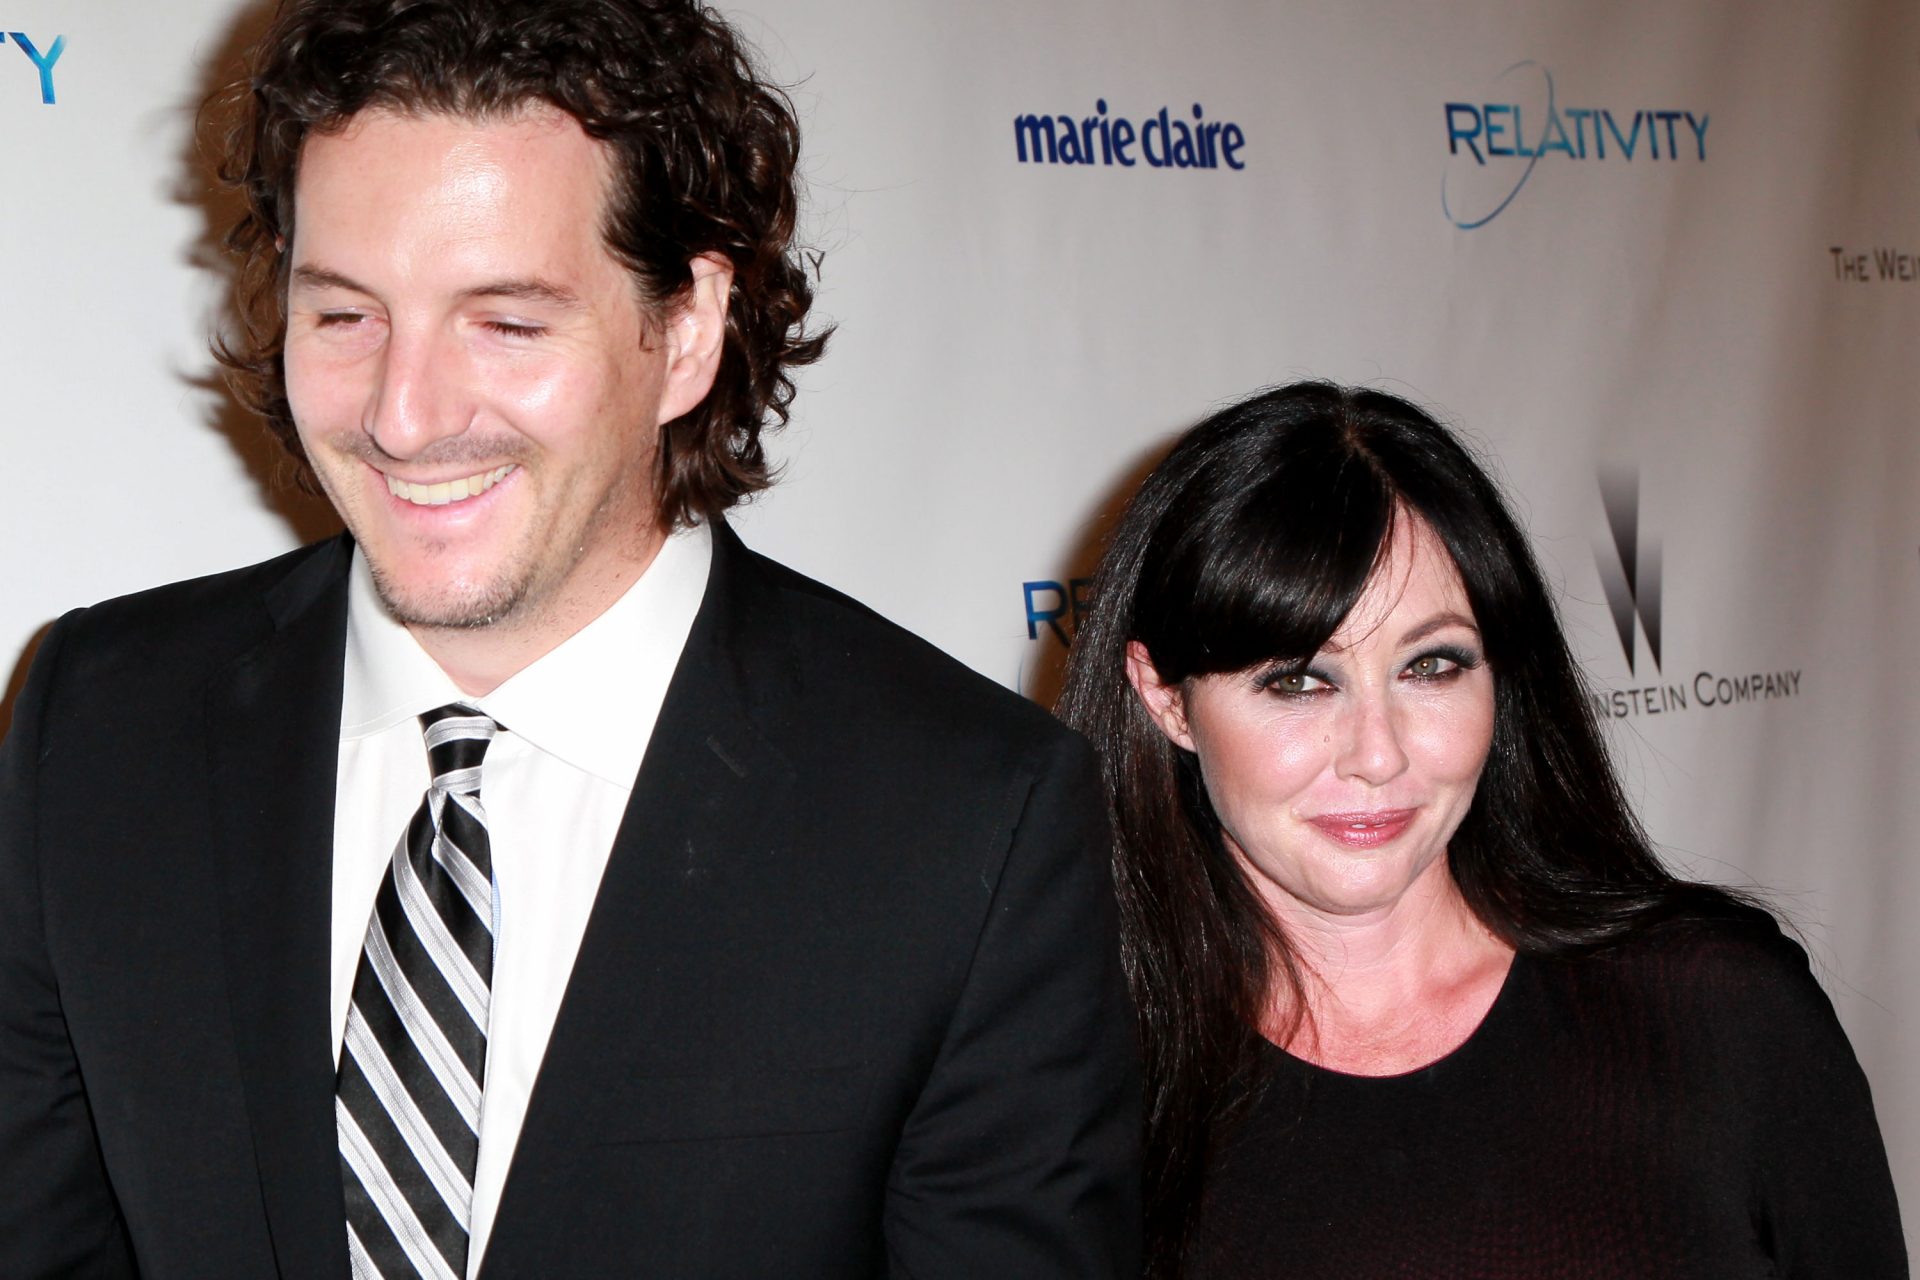 Ice cold: the harsh reason for Shannen Doherty's breakup